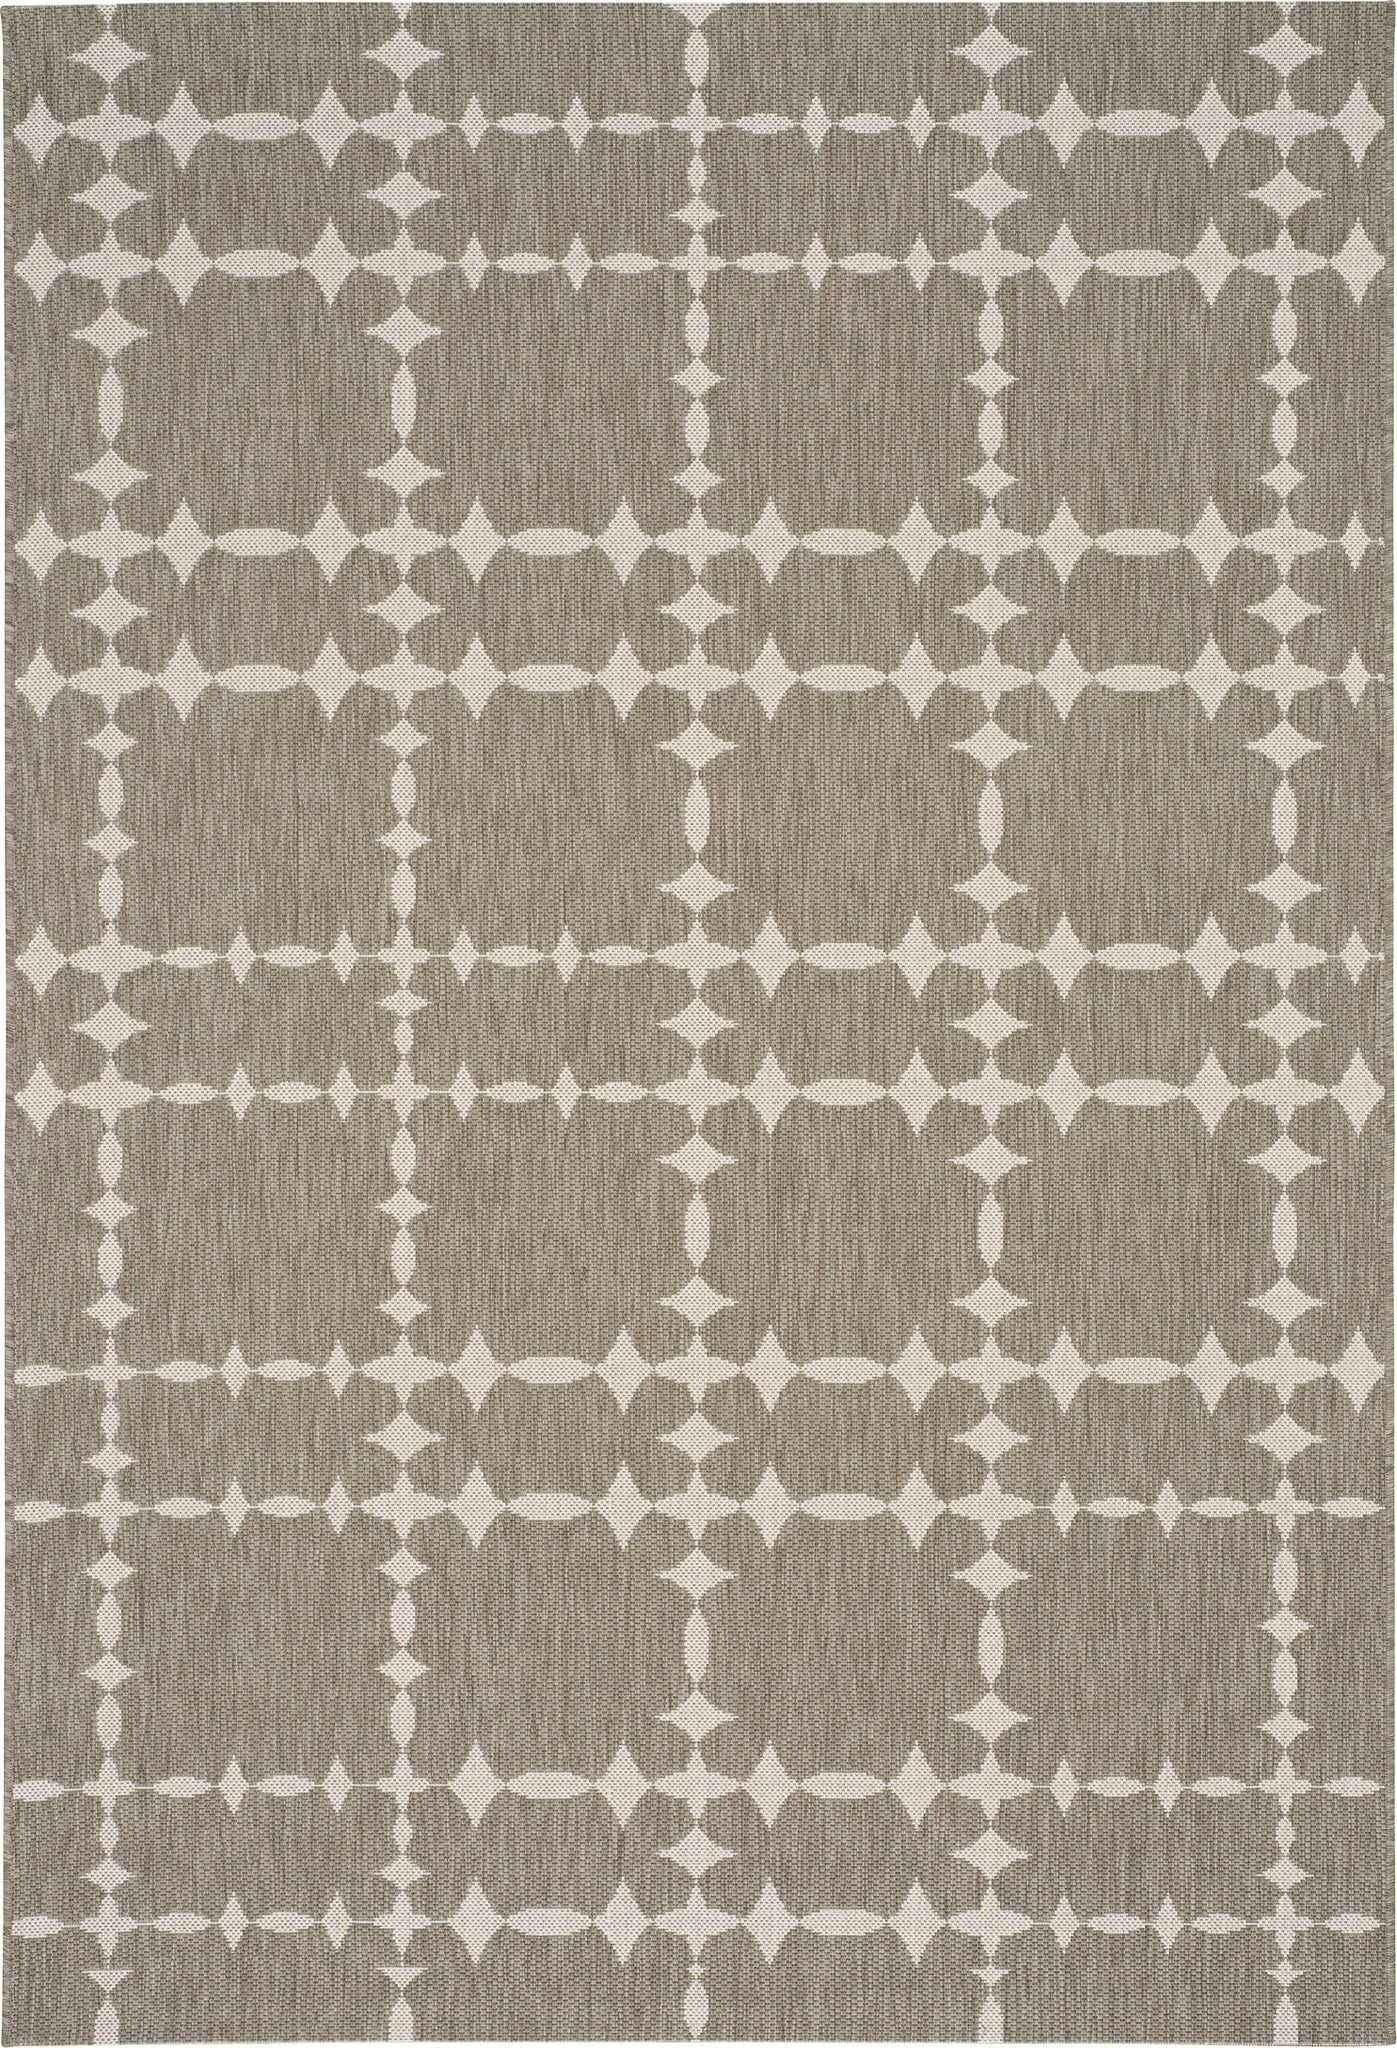 Capel COCOCOZY Elsinore-Tower Court 4738 Wheat Area Rug main image